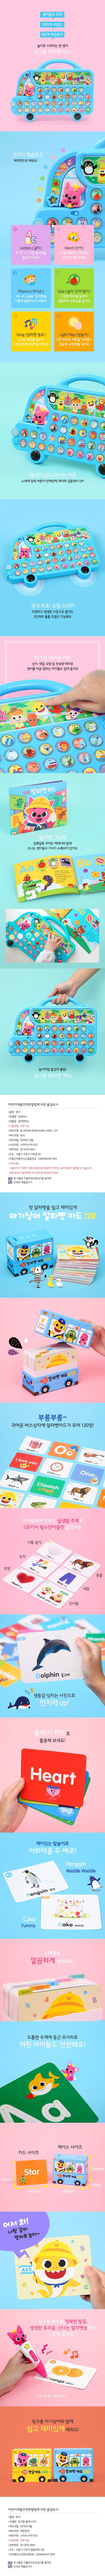 Pinkfong_Language Learning Bus With Word Card_2